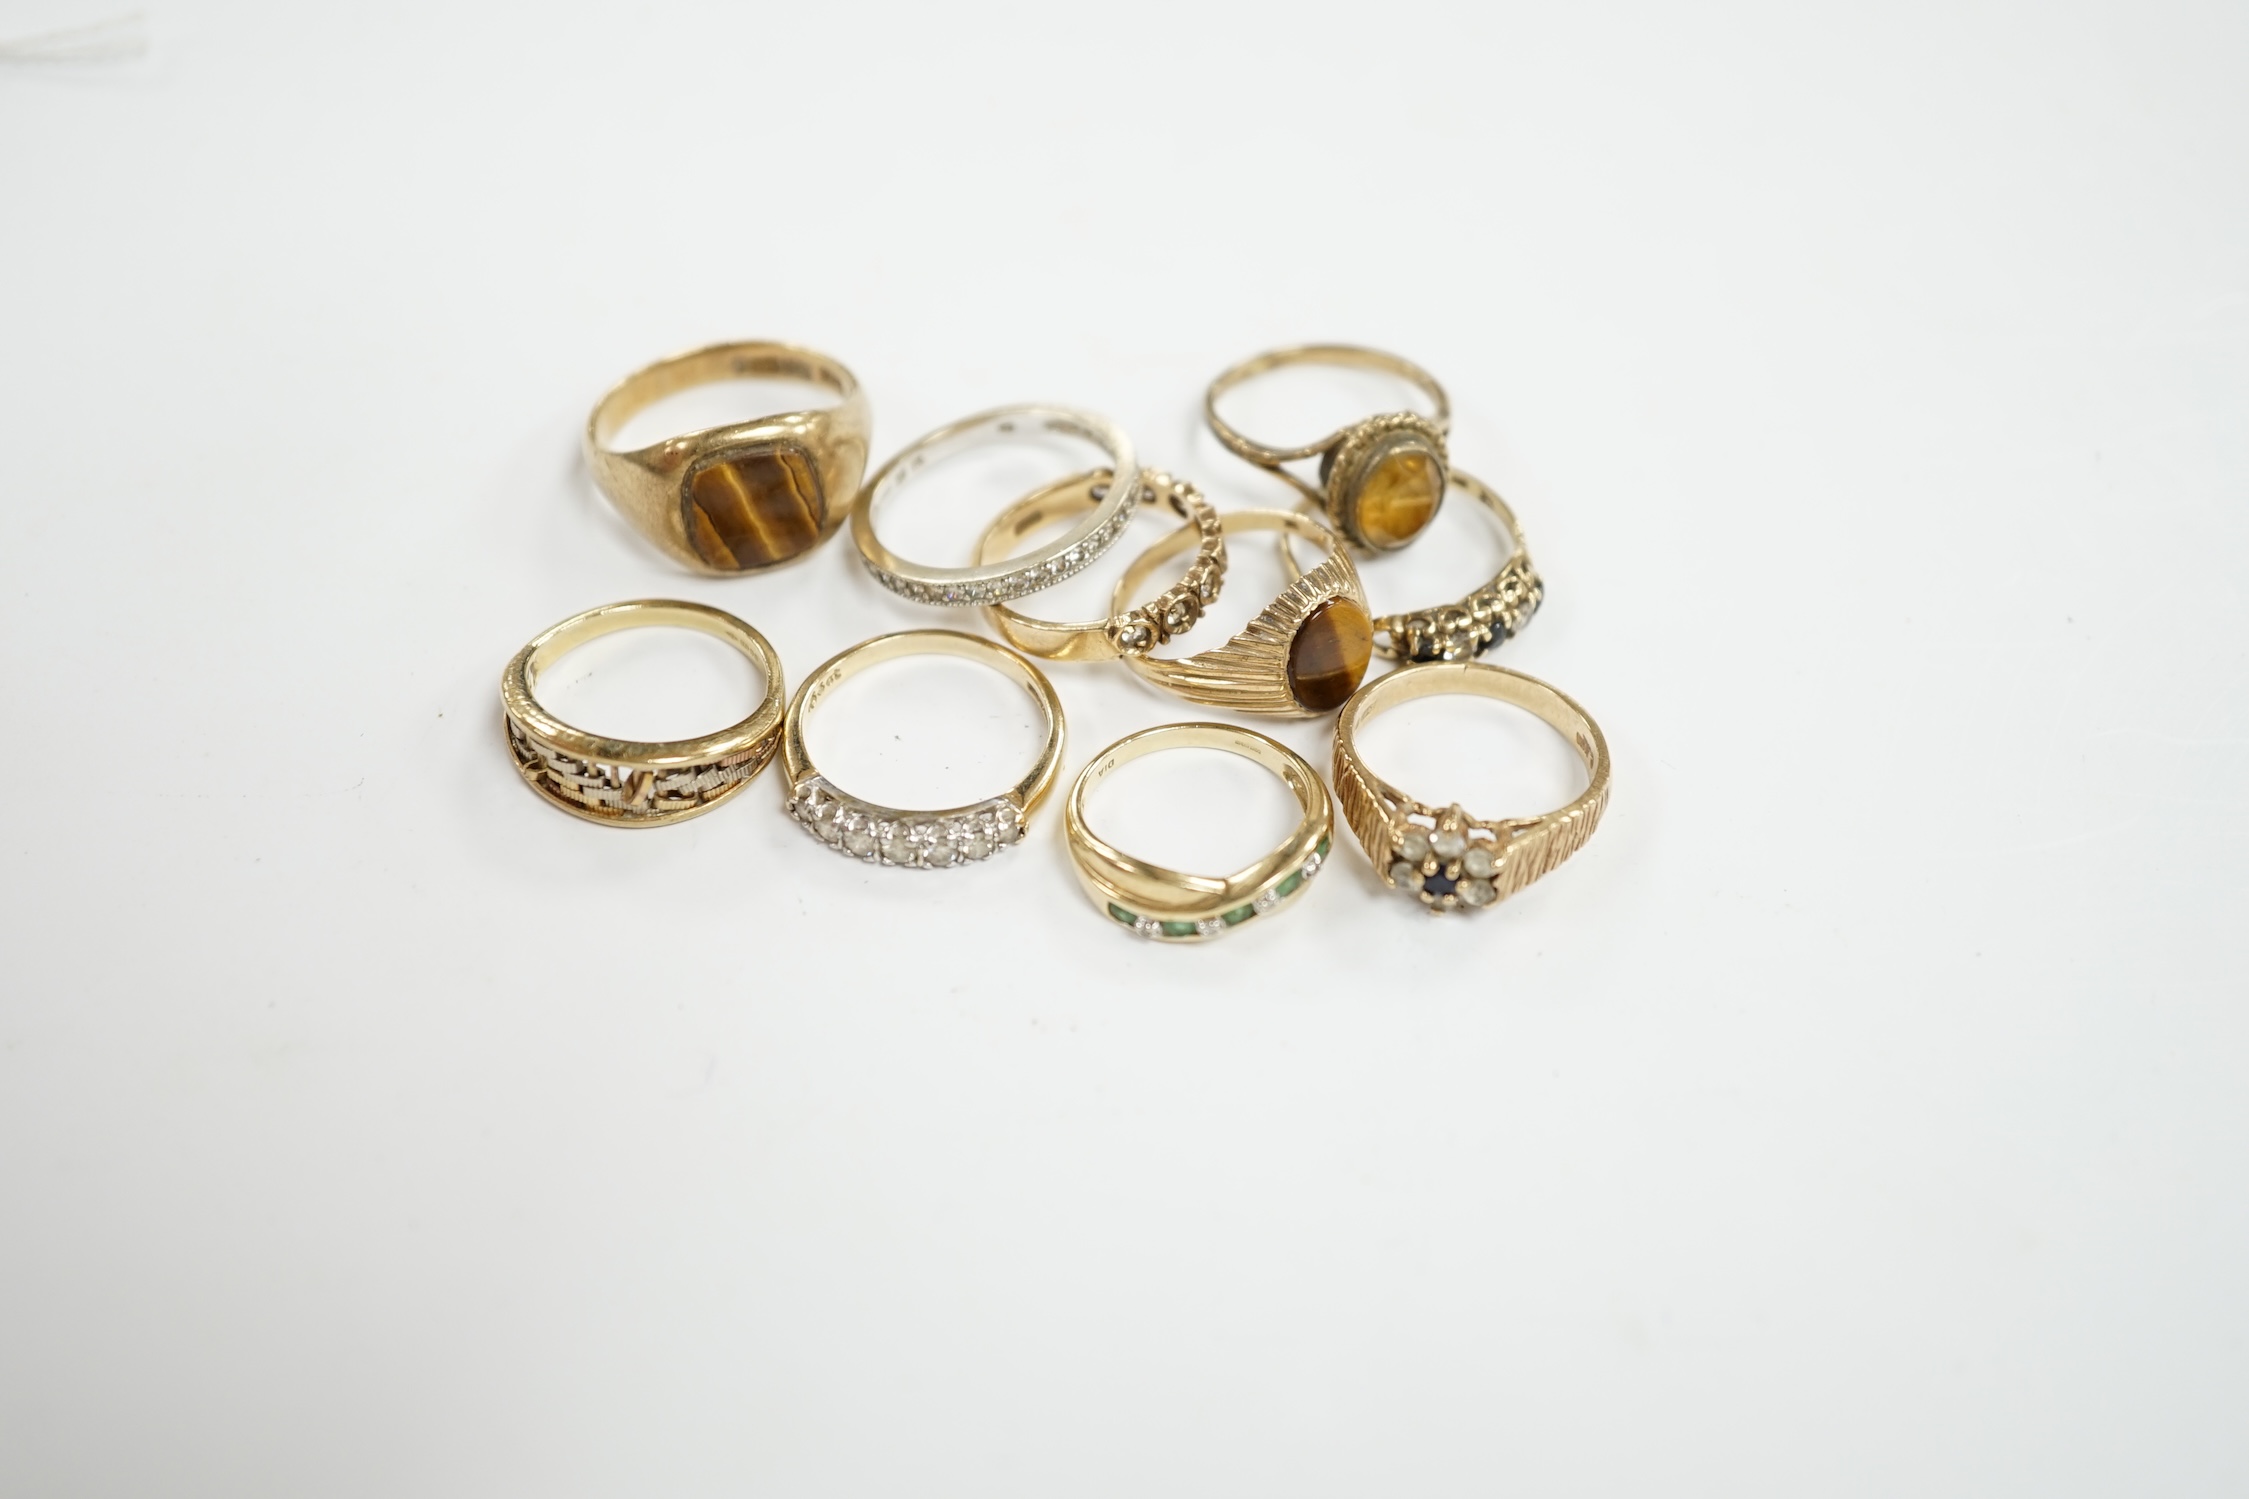 Ten assorted modern 9ct gold and mainly gem set rings, including two with tiger's eye quartz and a seven stone half hoop diamond set, size M/N, gross weight 25.5 grams. Condition - fair